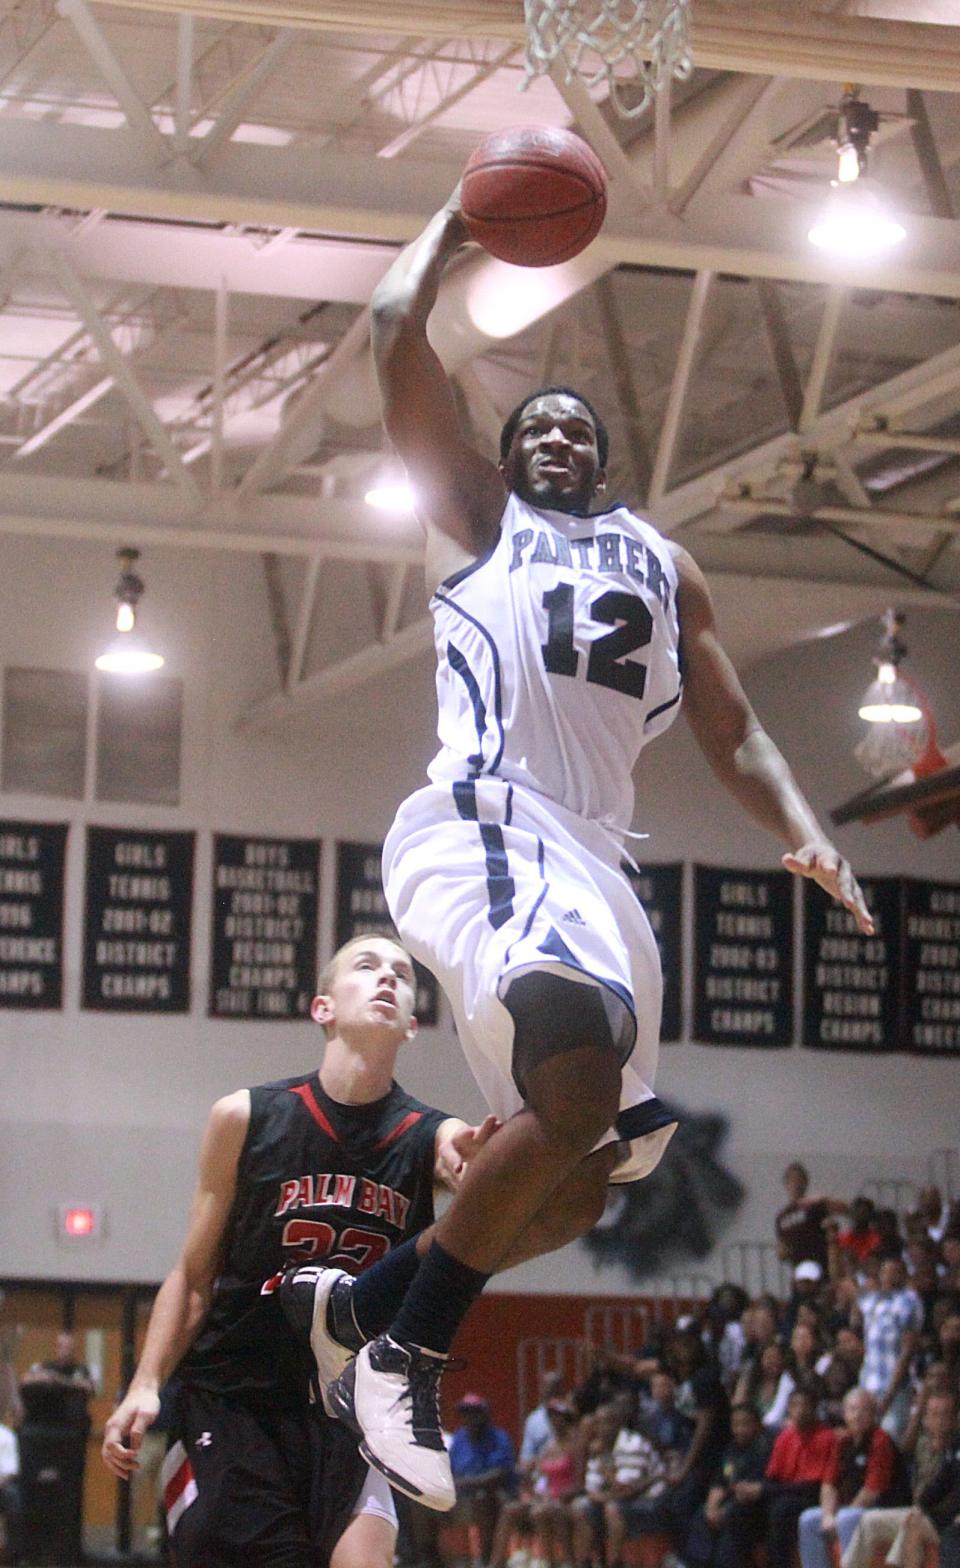 Dwyer's Jacoby Brissett goes in for dunk against Melbourne-Palm Bay during boys prep regional final basketball game at Dwyer in 2011.